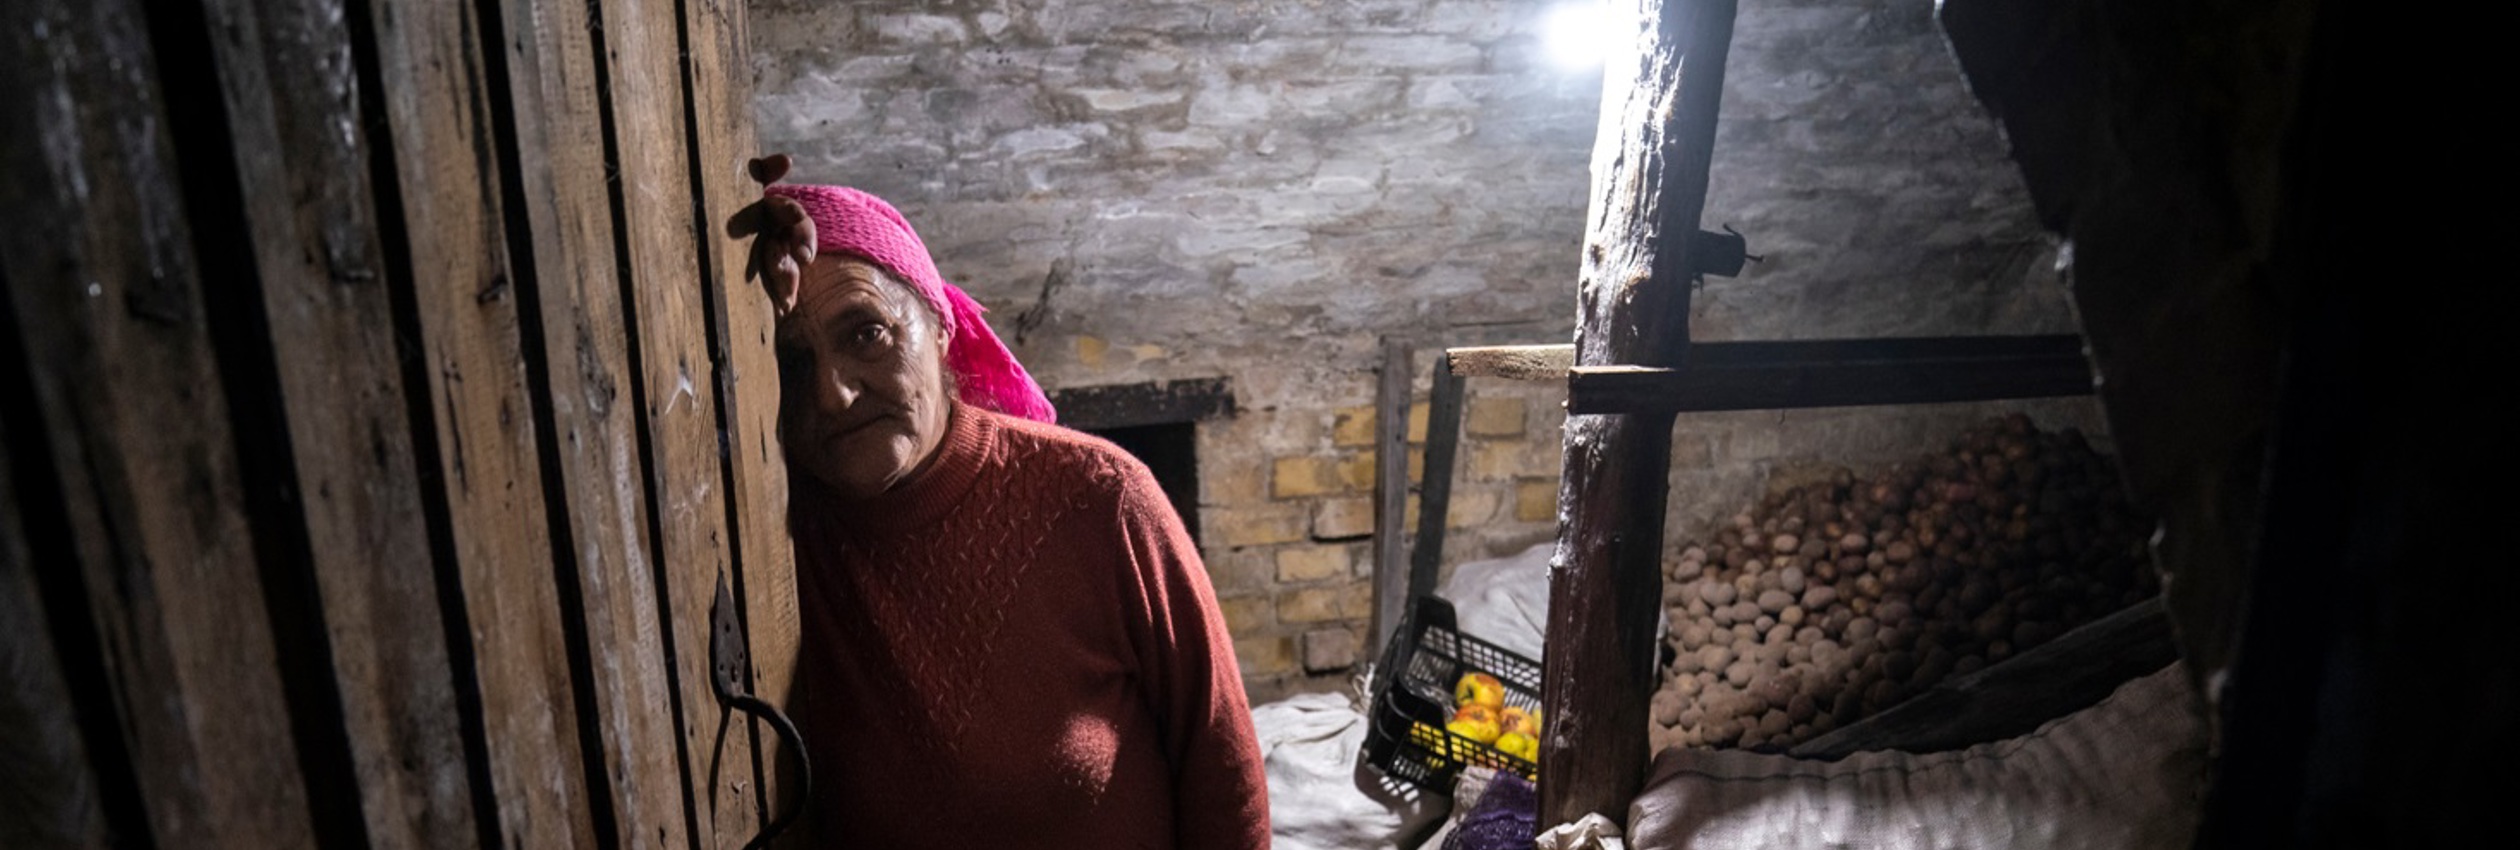 Liudmyla, 70, stands in her potato cellar, where she sheltered for a month during intense fighting.